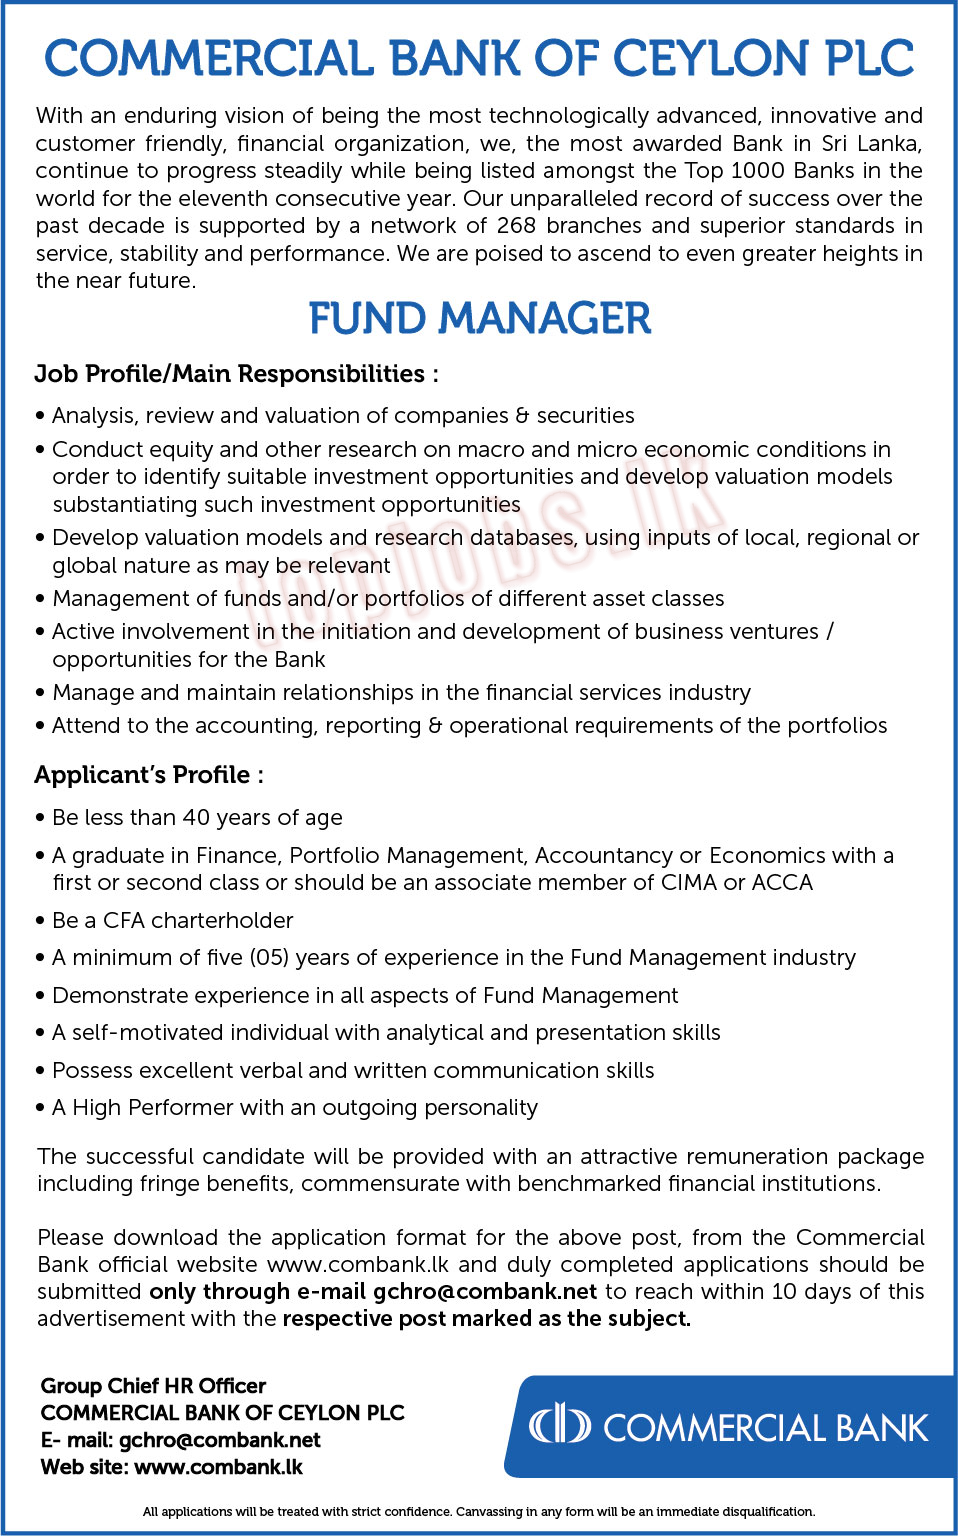 Fund Manager Vacancy in Commercial Bank of Ceylon PLC